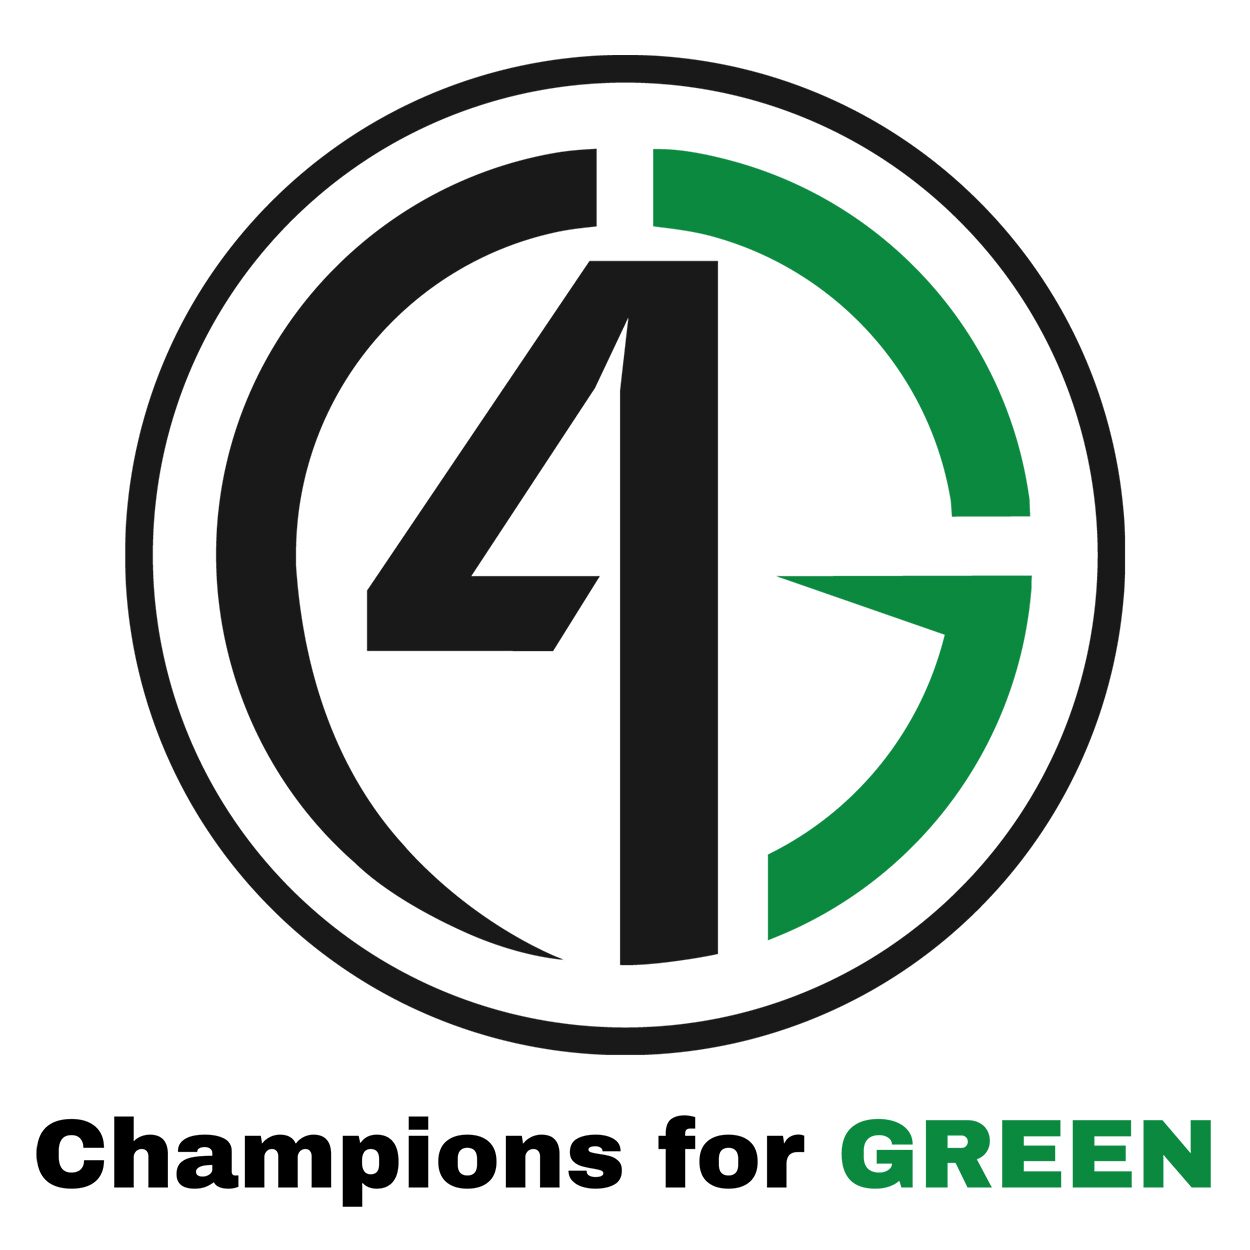 Champions for green logo